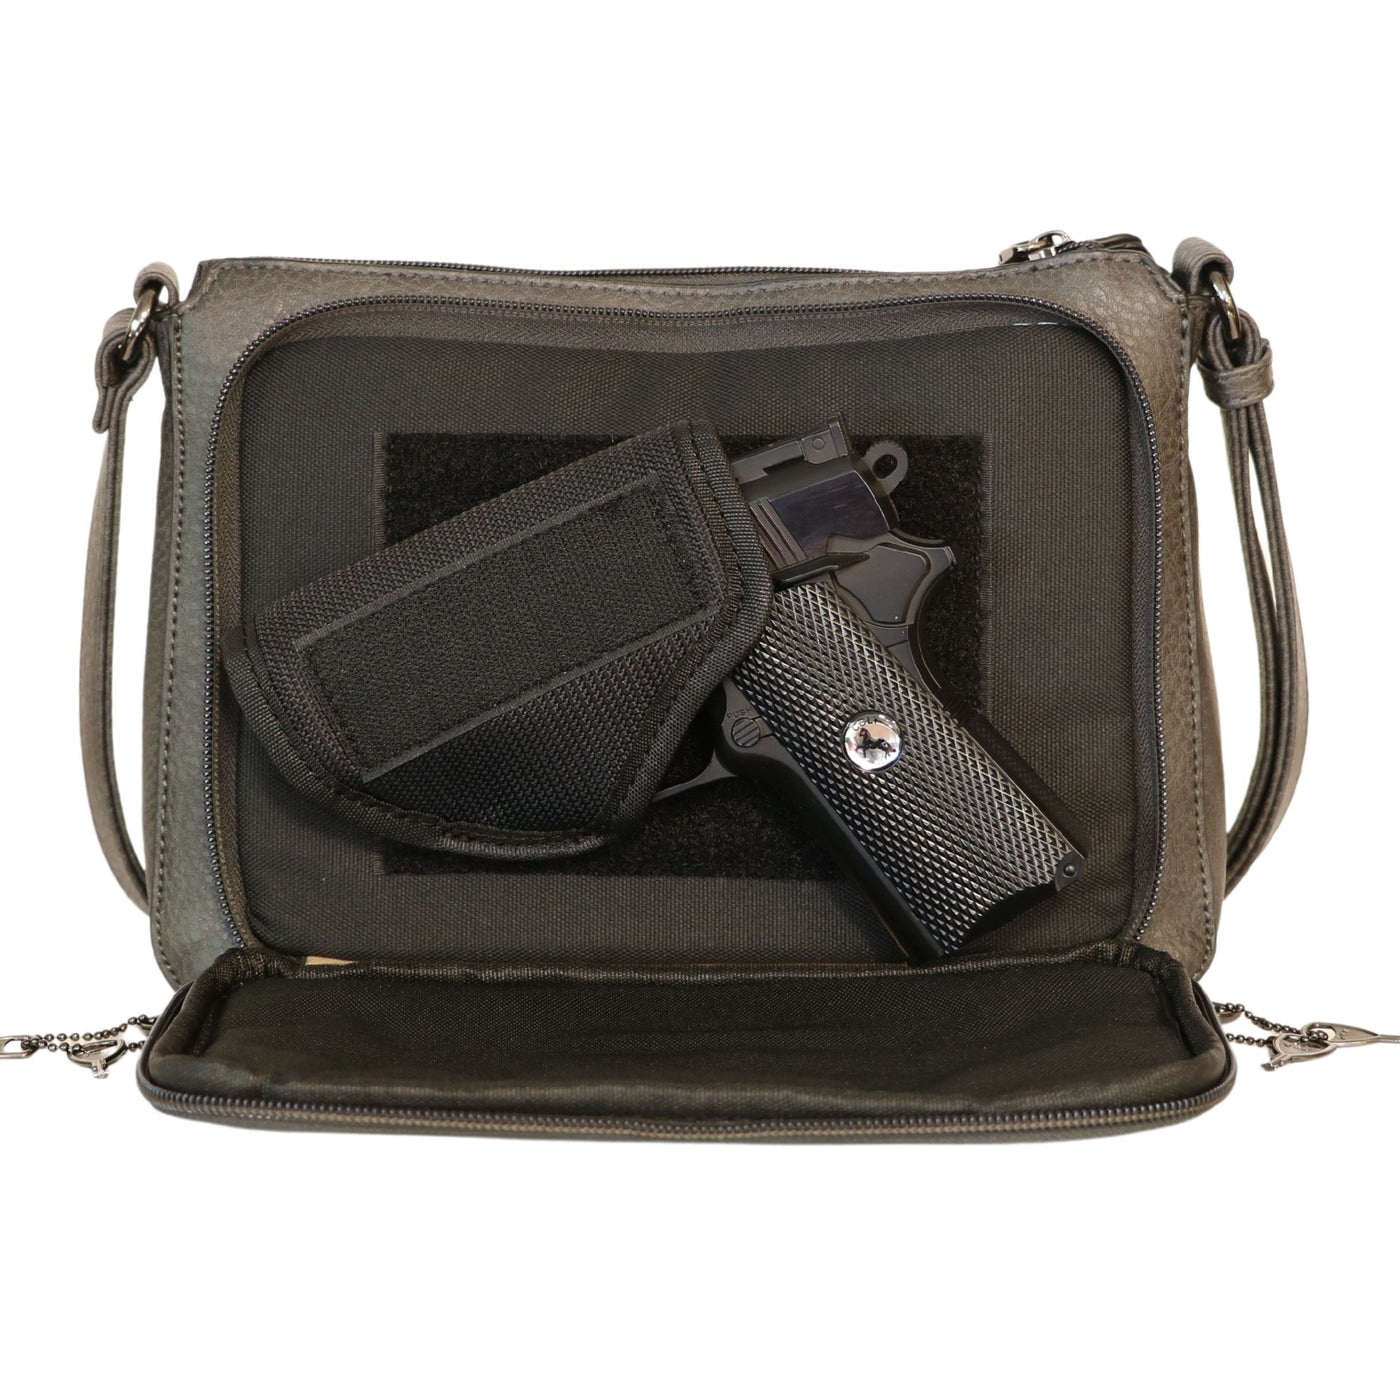 Concealed Carry Kinsley Crossbody Wallet-  YKK Locking Zippered Bag -  Easy Conceal Carry - CCW Purse for Women -  concealed carry Handbag for woman - Crossbody with RFID Slim Wallet - CCW Bag for Pistol - Fast and Easy Draw Bag